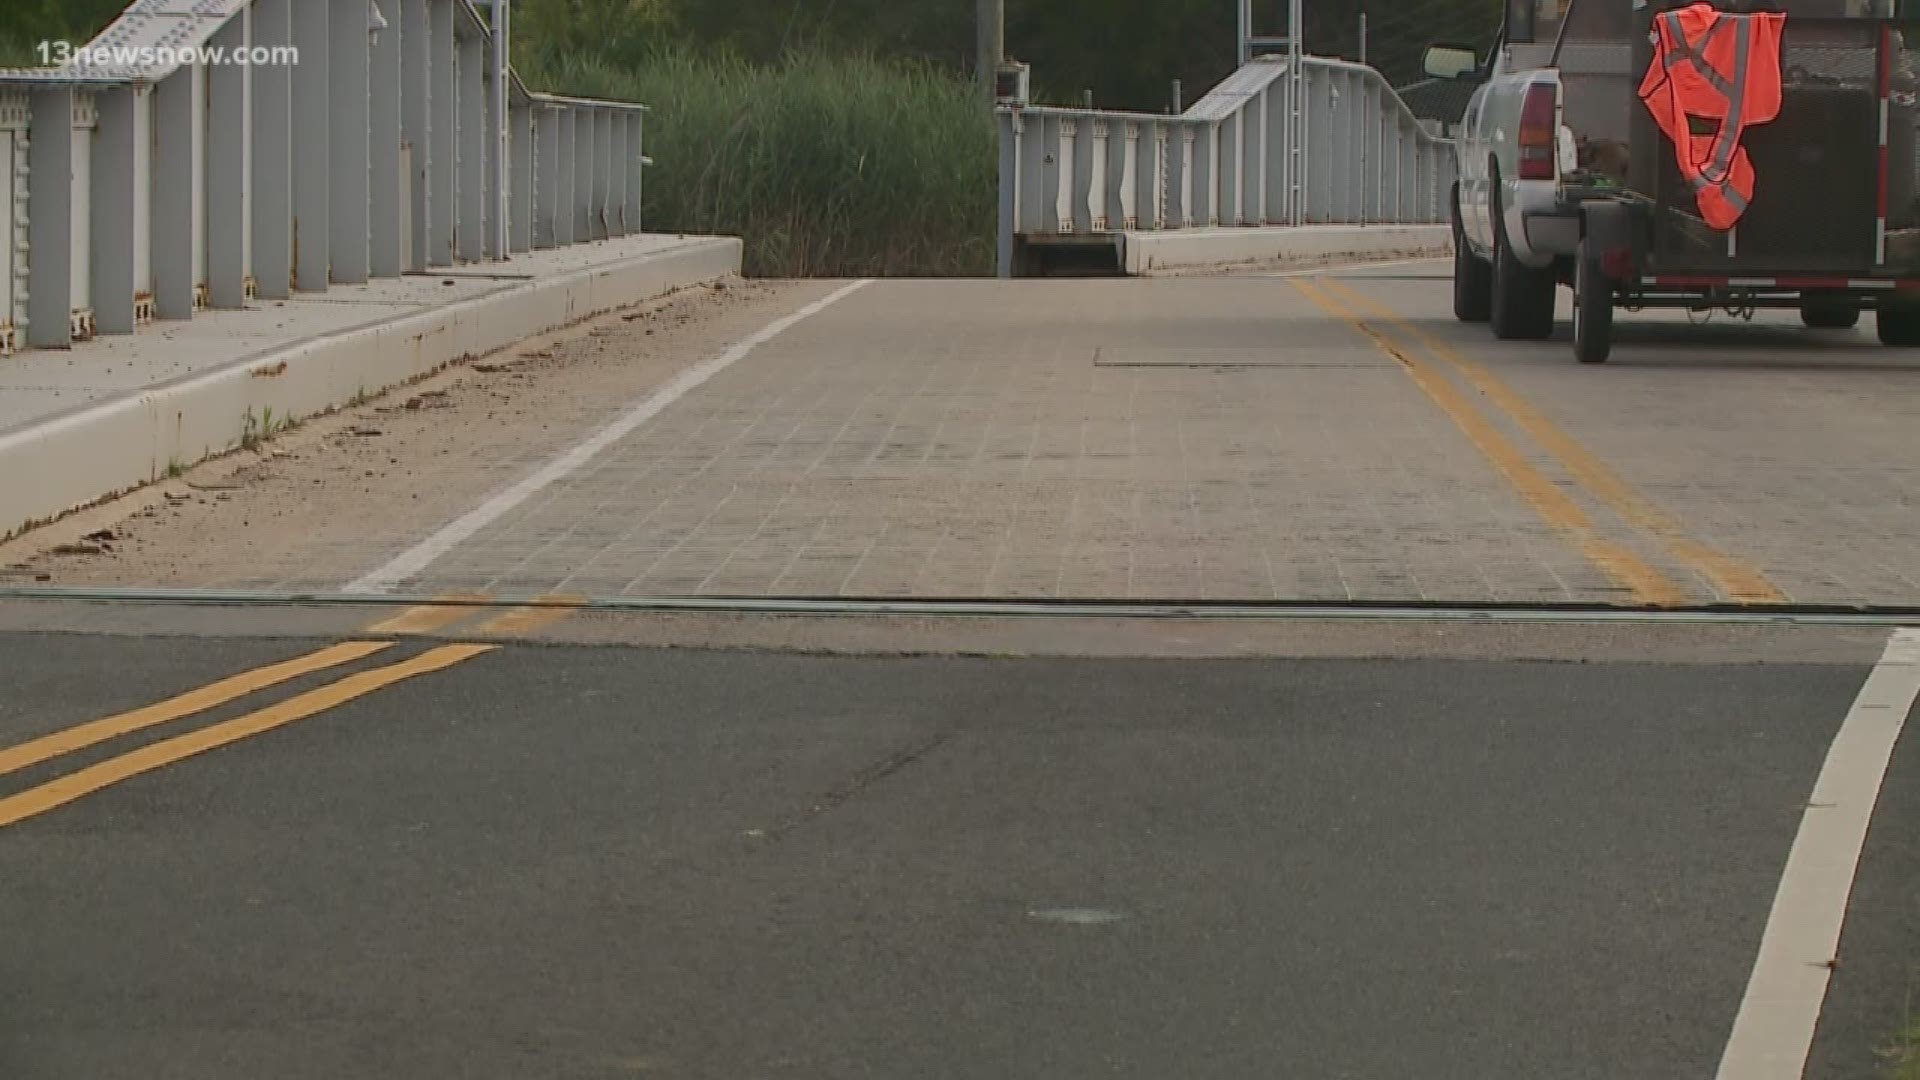 A critical connecting point between Chesapeake and Virginia Beach is closed, again. The North Landing Bridge is expected to remain closed until Thursday.